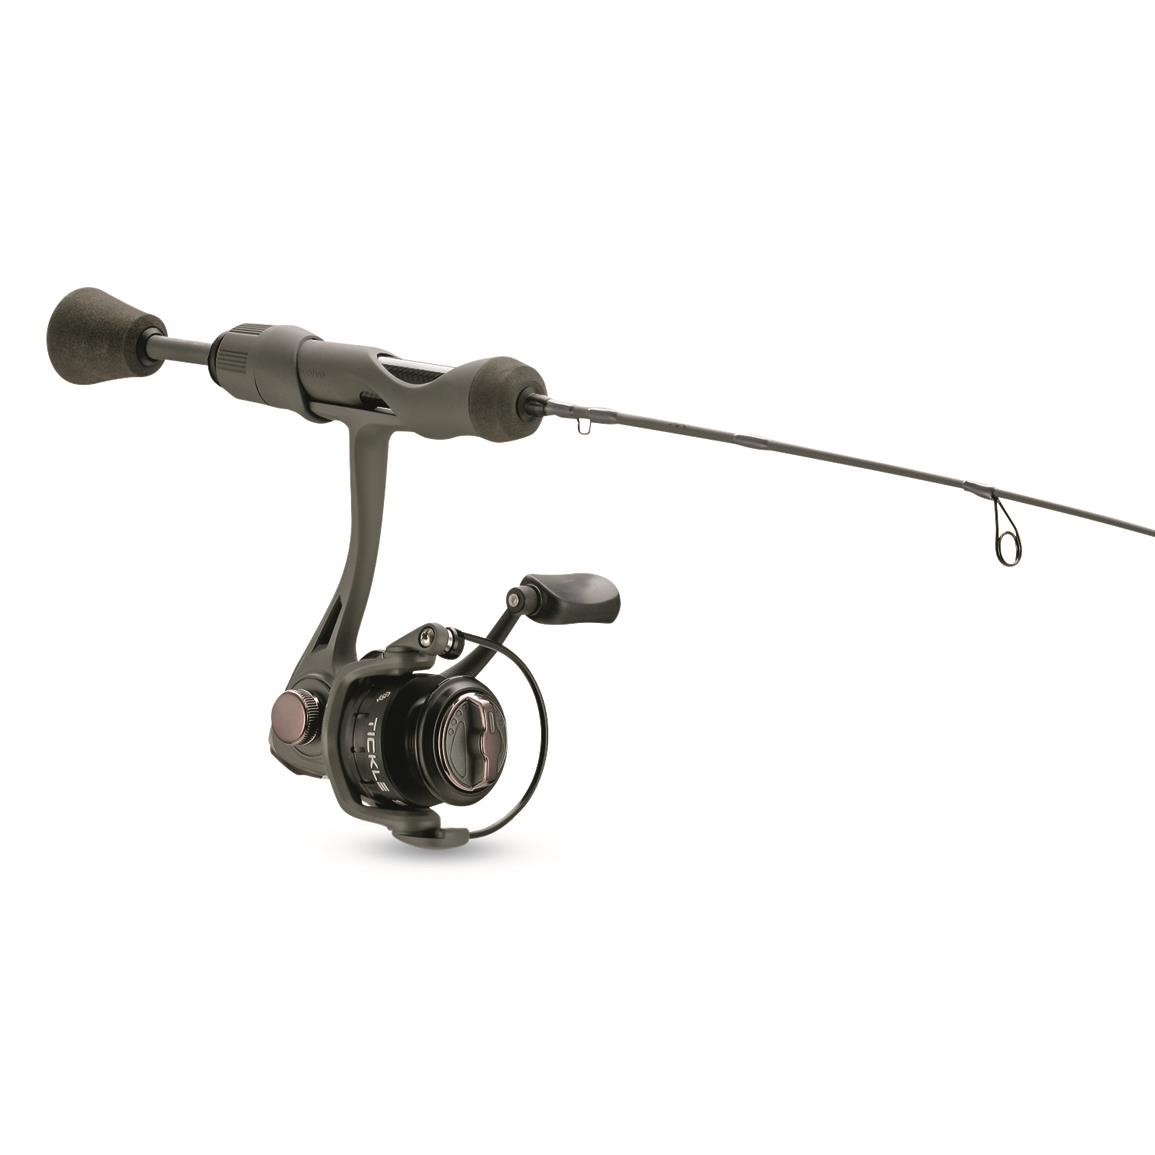 13 Fishing Snitch Pro Ice Fishing Spinning Rod and Reel Combo, 23